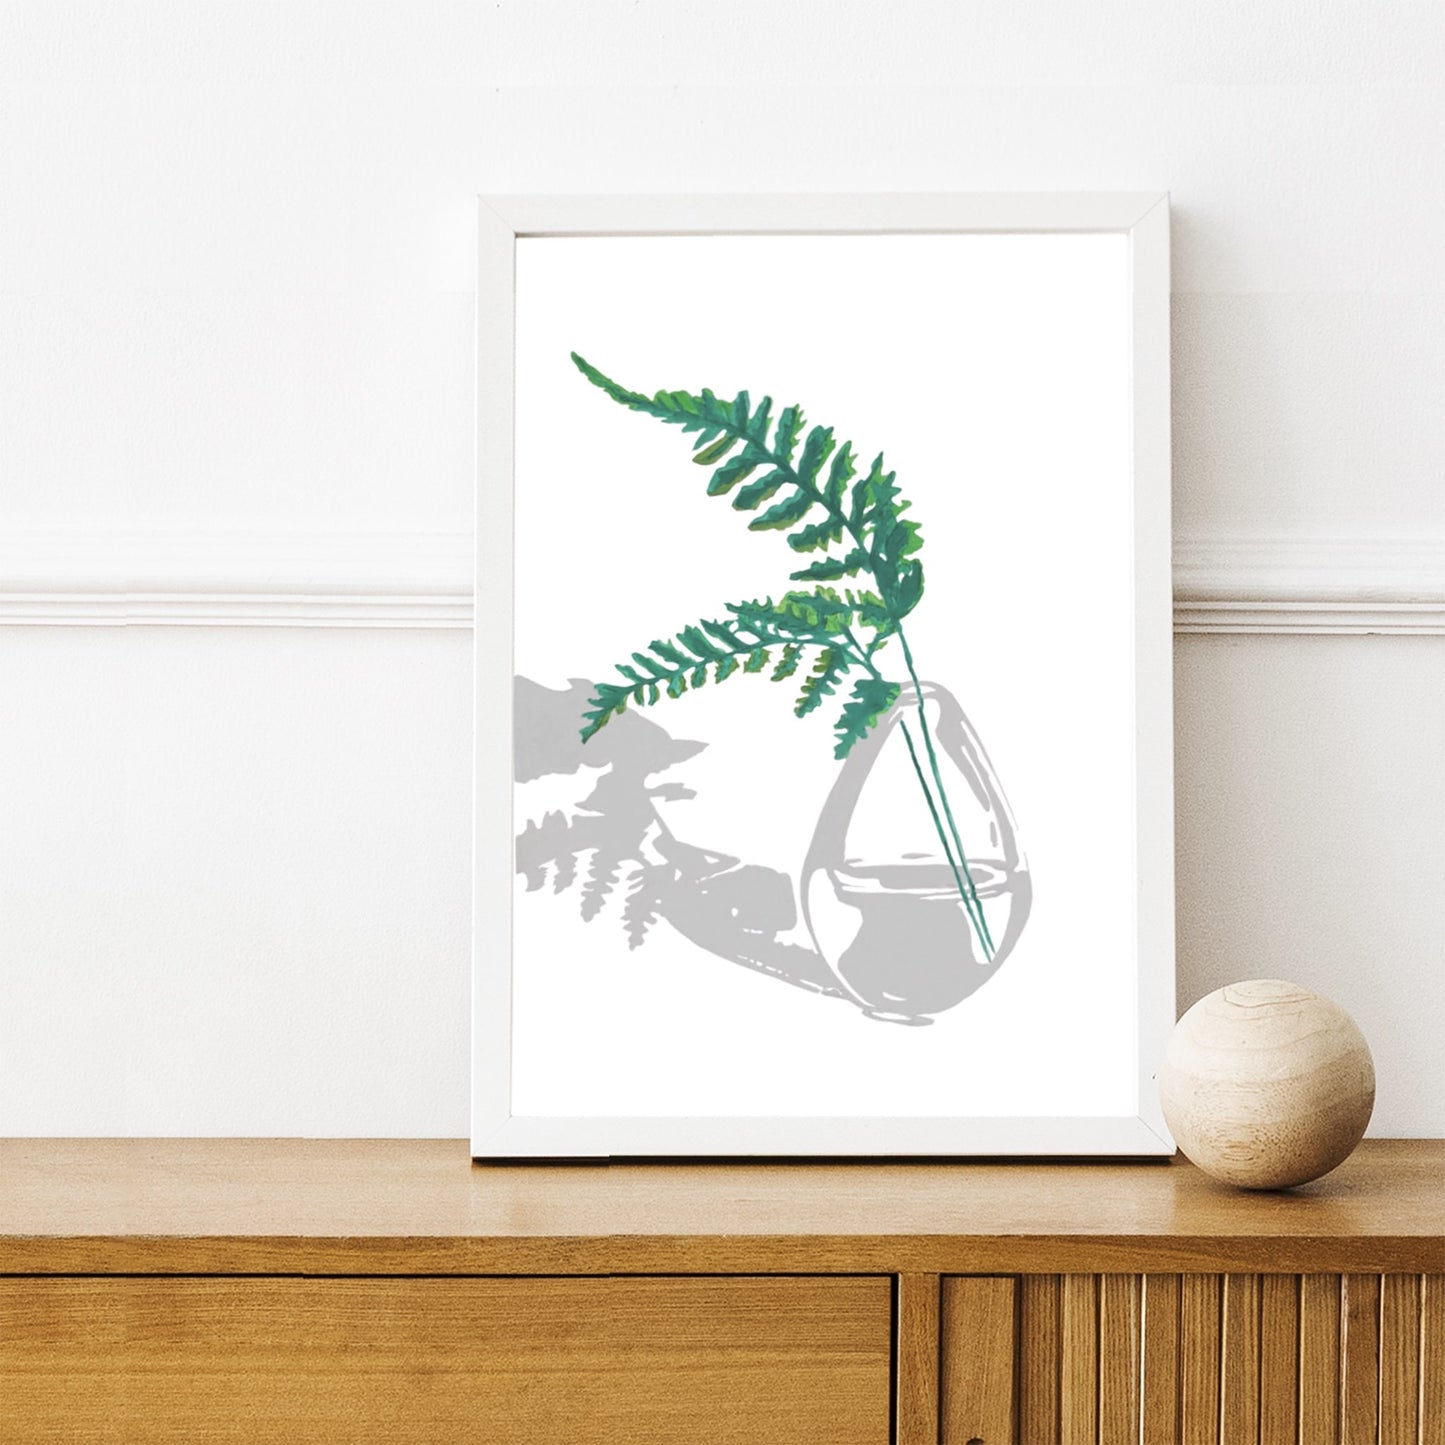 Minimalistic paint by number acrylic painting of green fern leaves in glass vase, framed in a black picture frame.